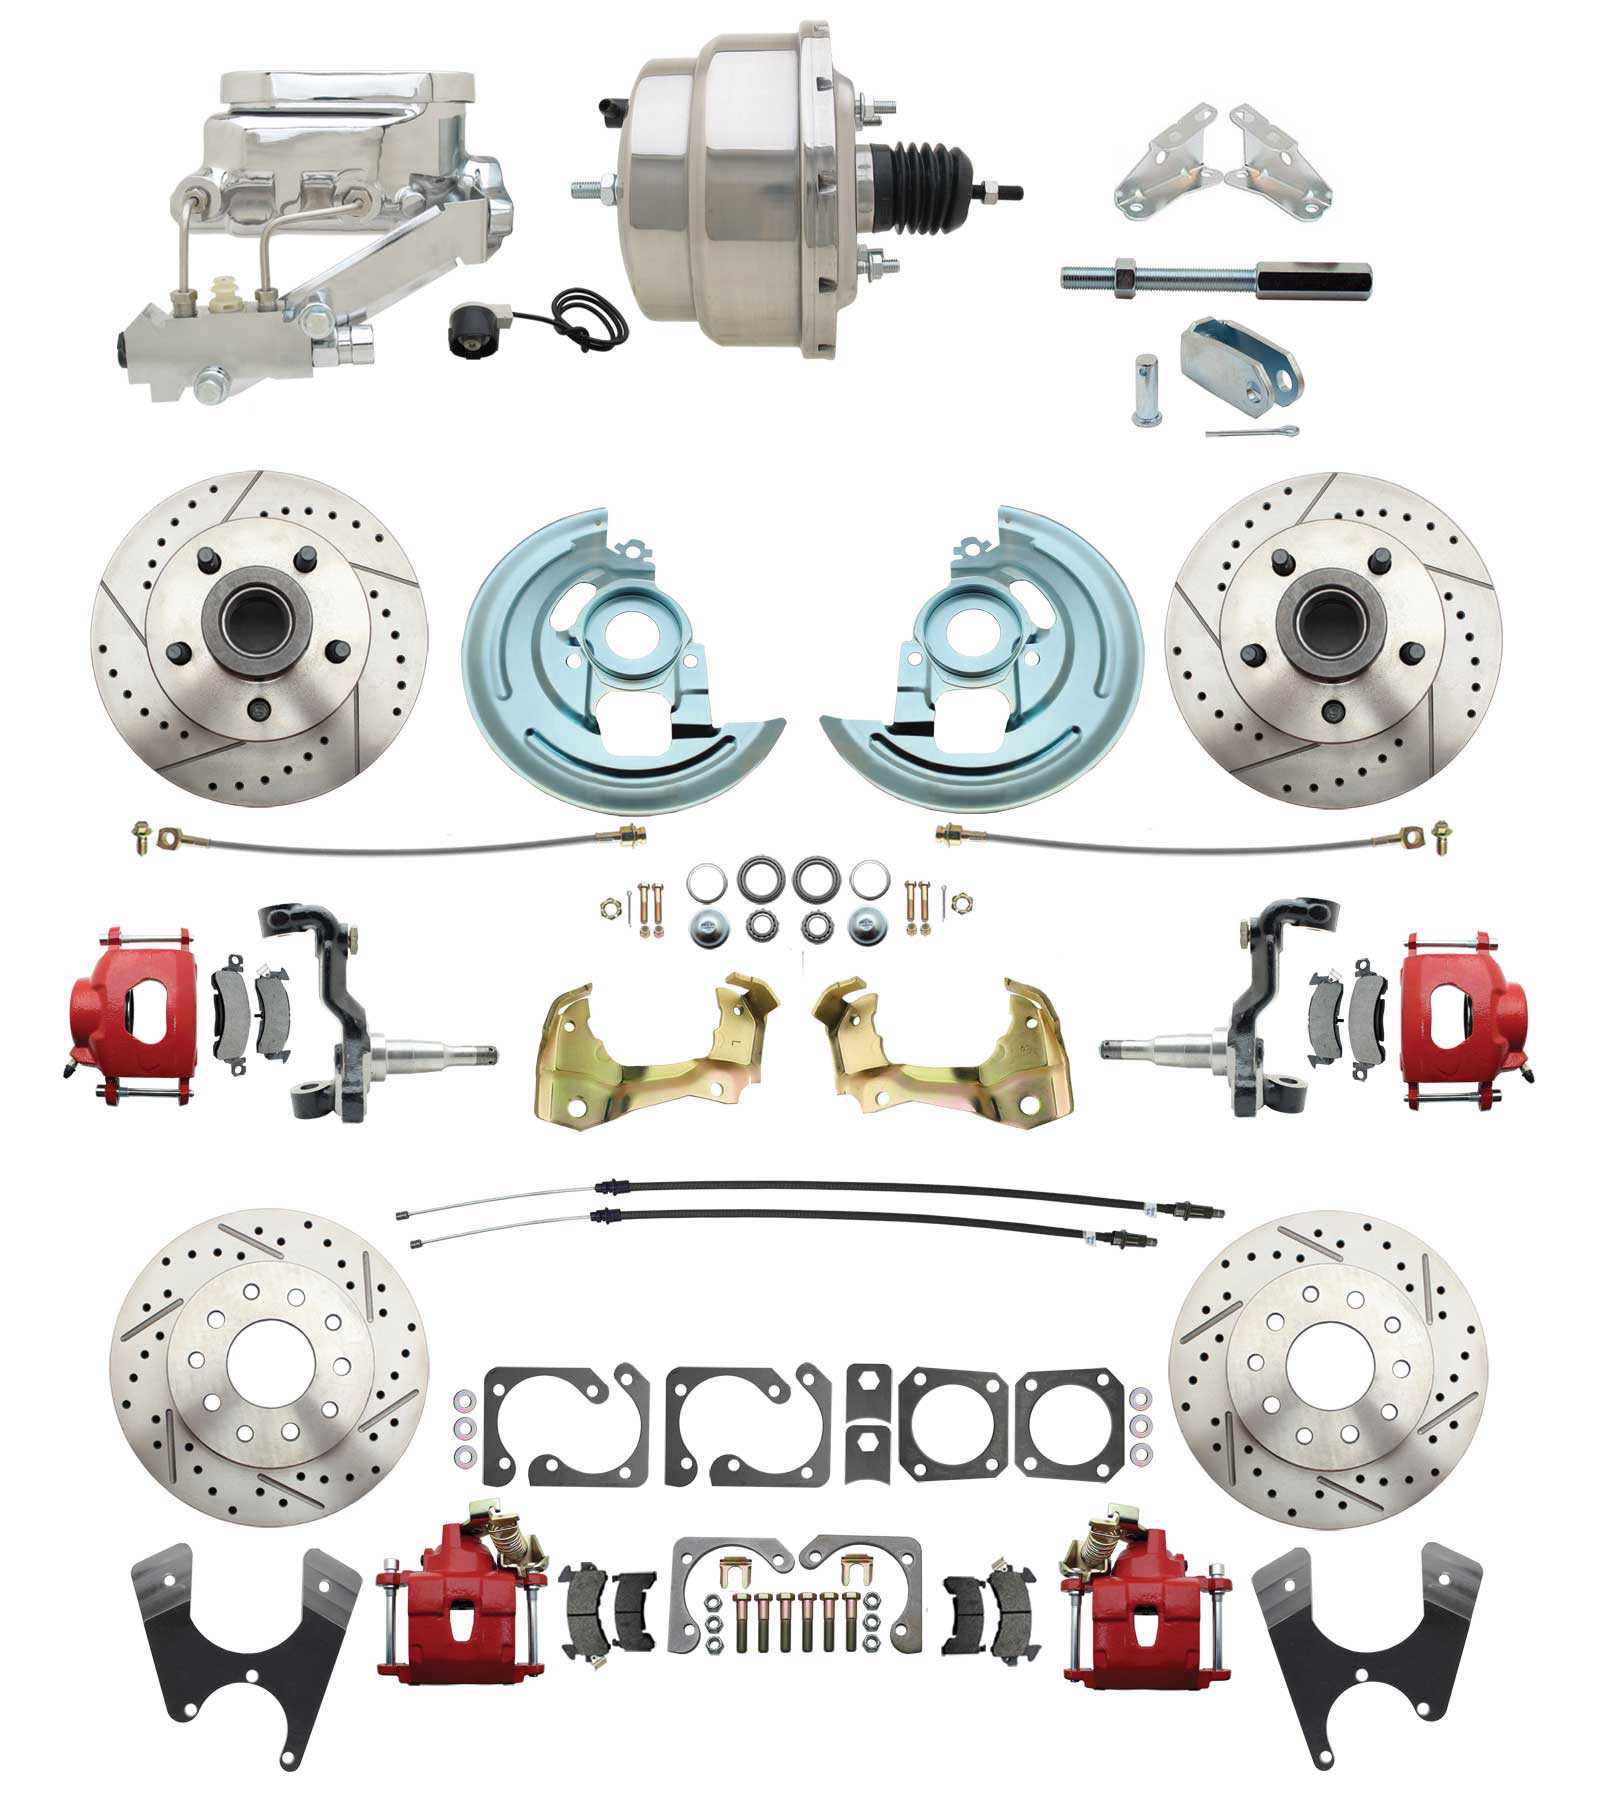 1967-1969 Camaro/ Firebird & 1968-1974 Chevy Nova Front & Rear Power Disc Brake Conversion Kit Drilled & Slotted & Powder Coated Red Calipers Rotors W/8 Dual Chrome Flat Top Booster Kit